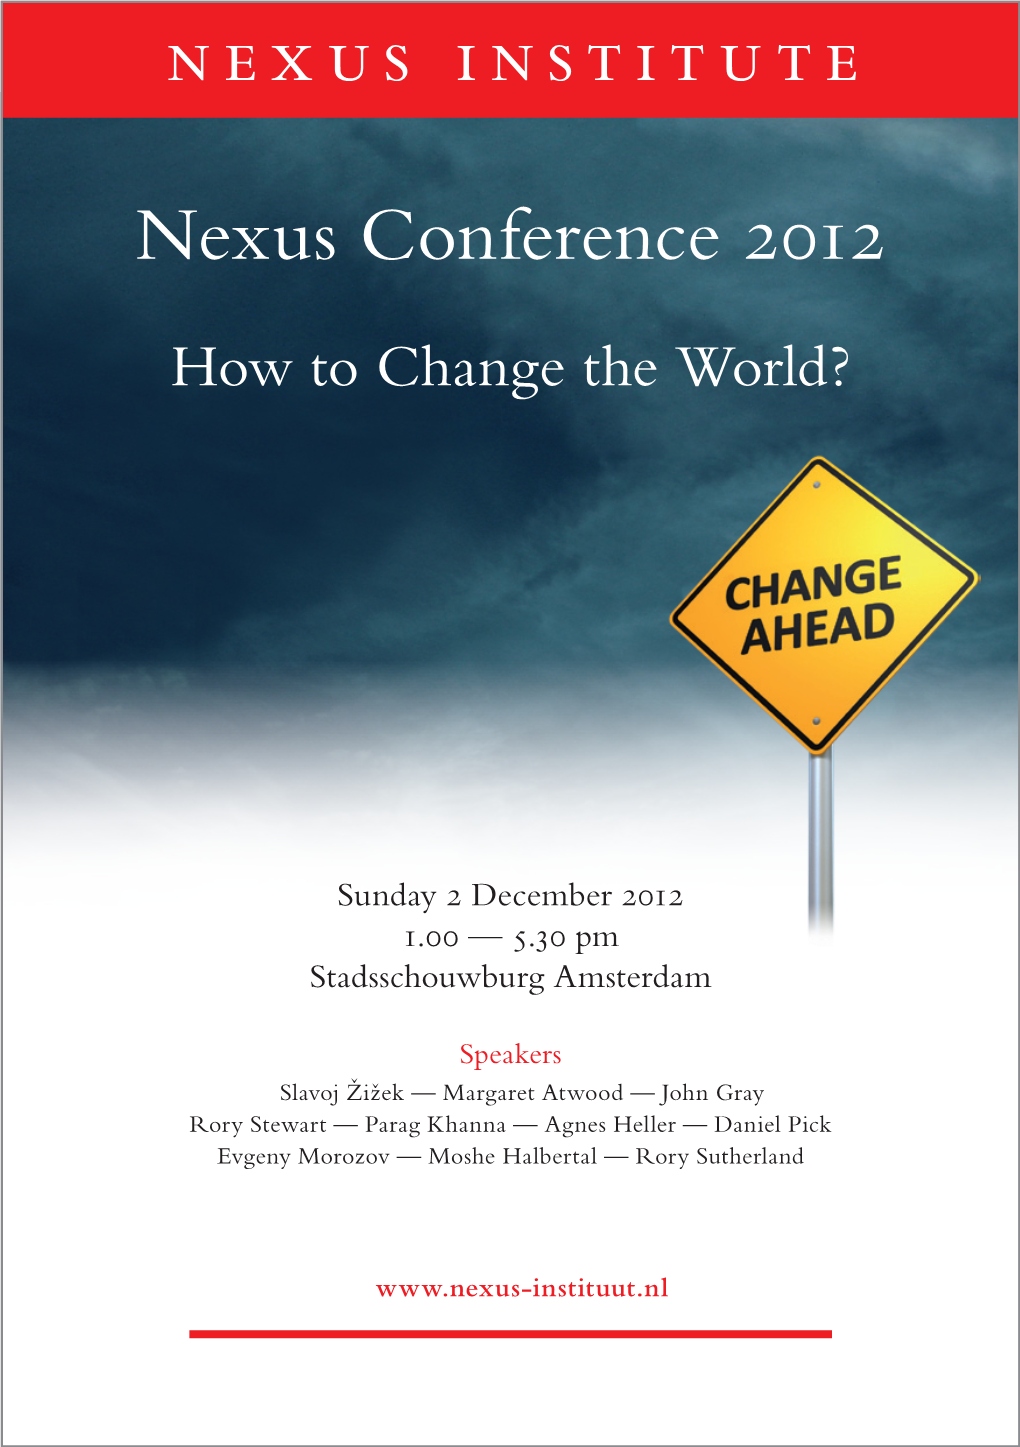 Nexus Conference 2012 How to Change the World?